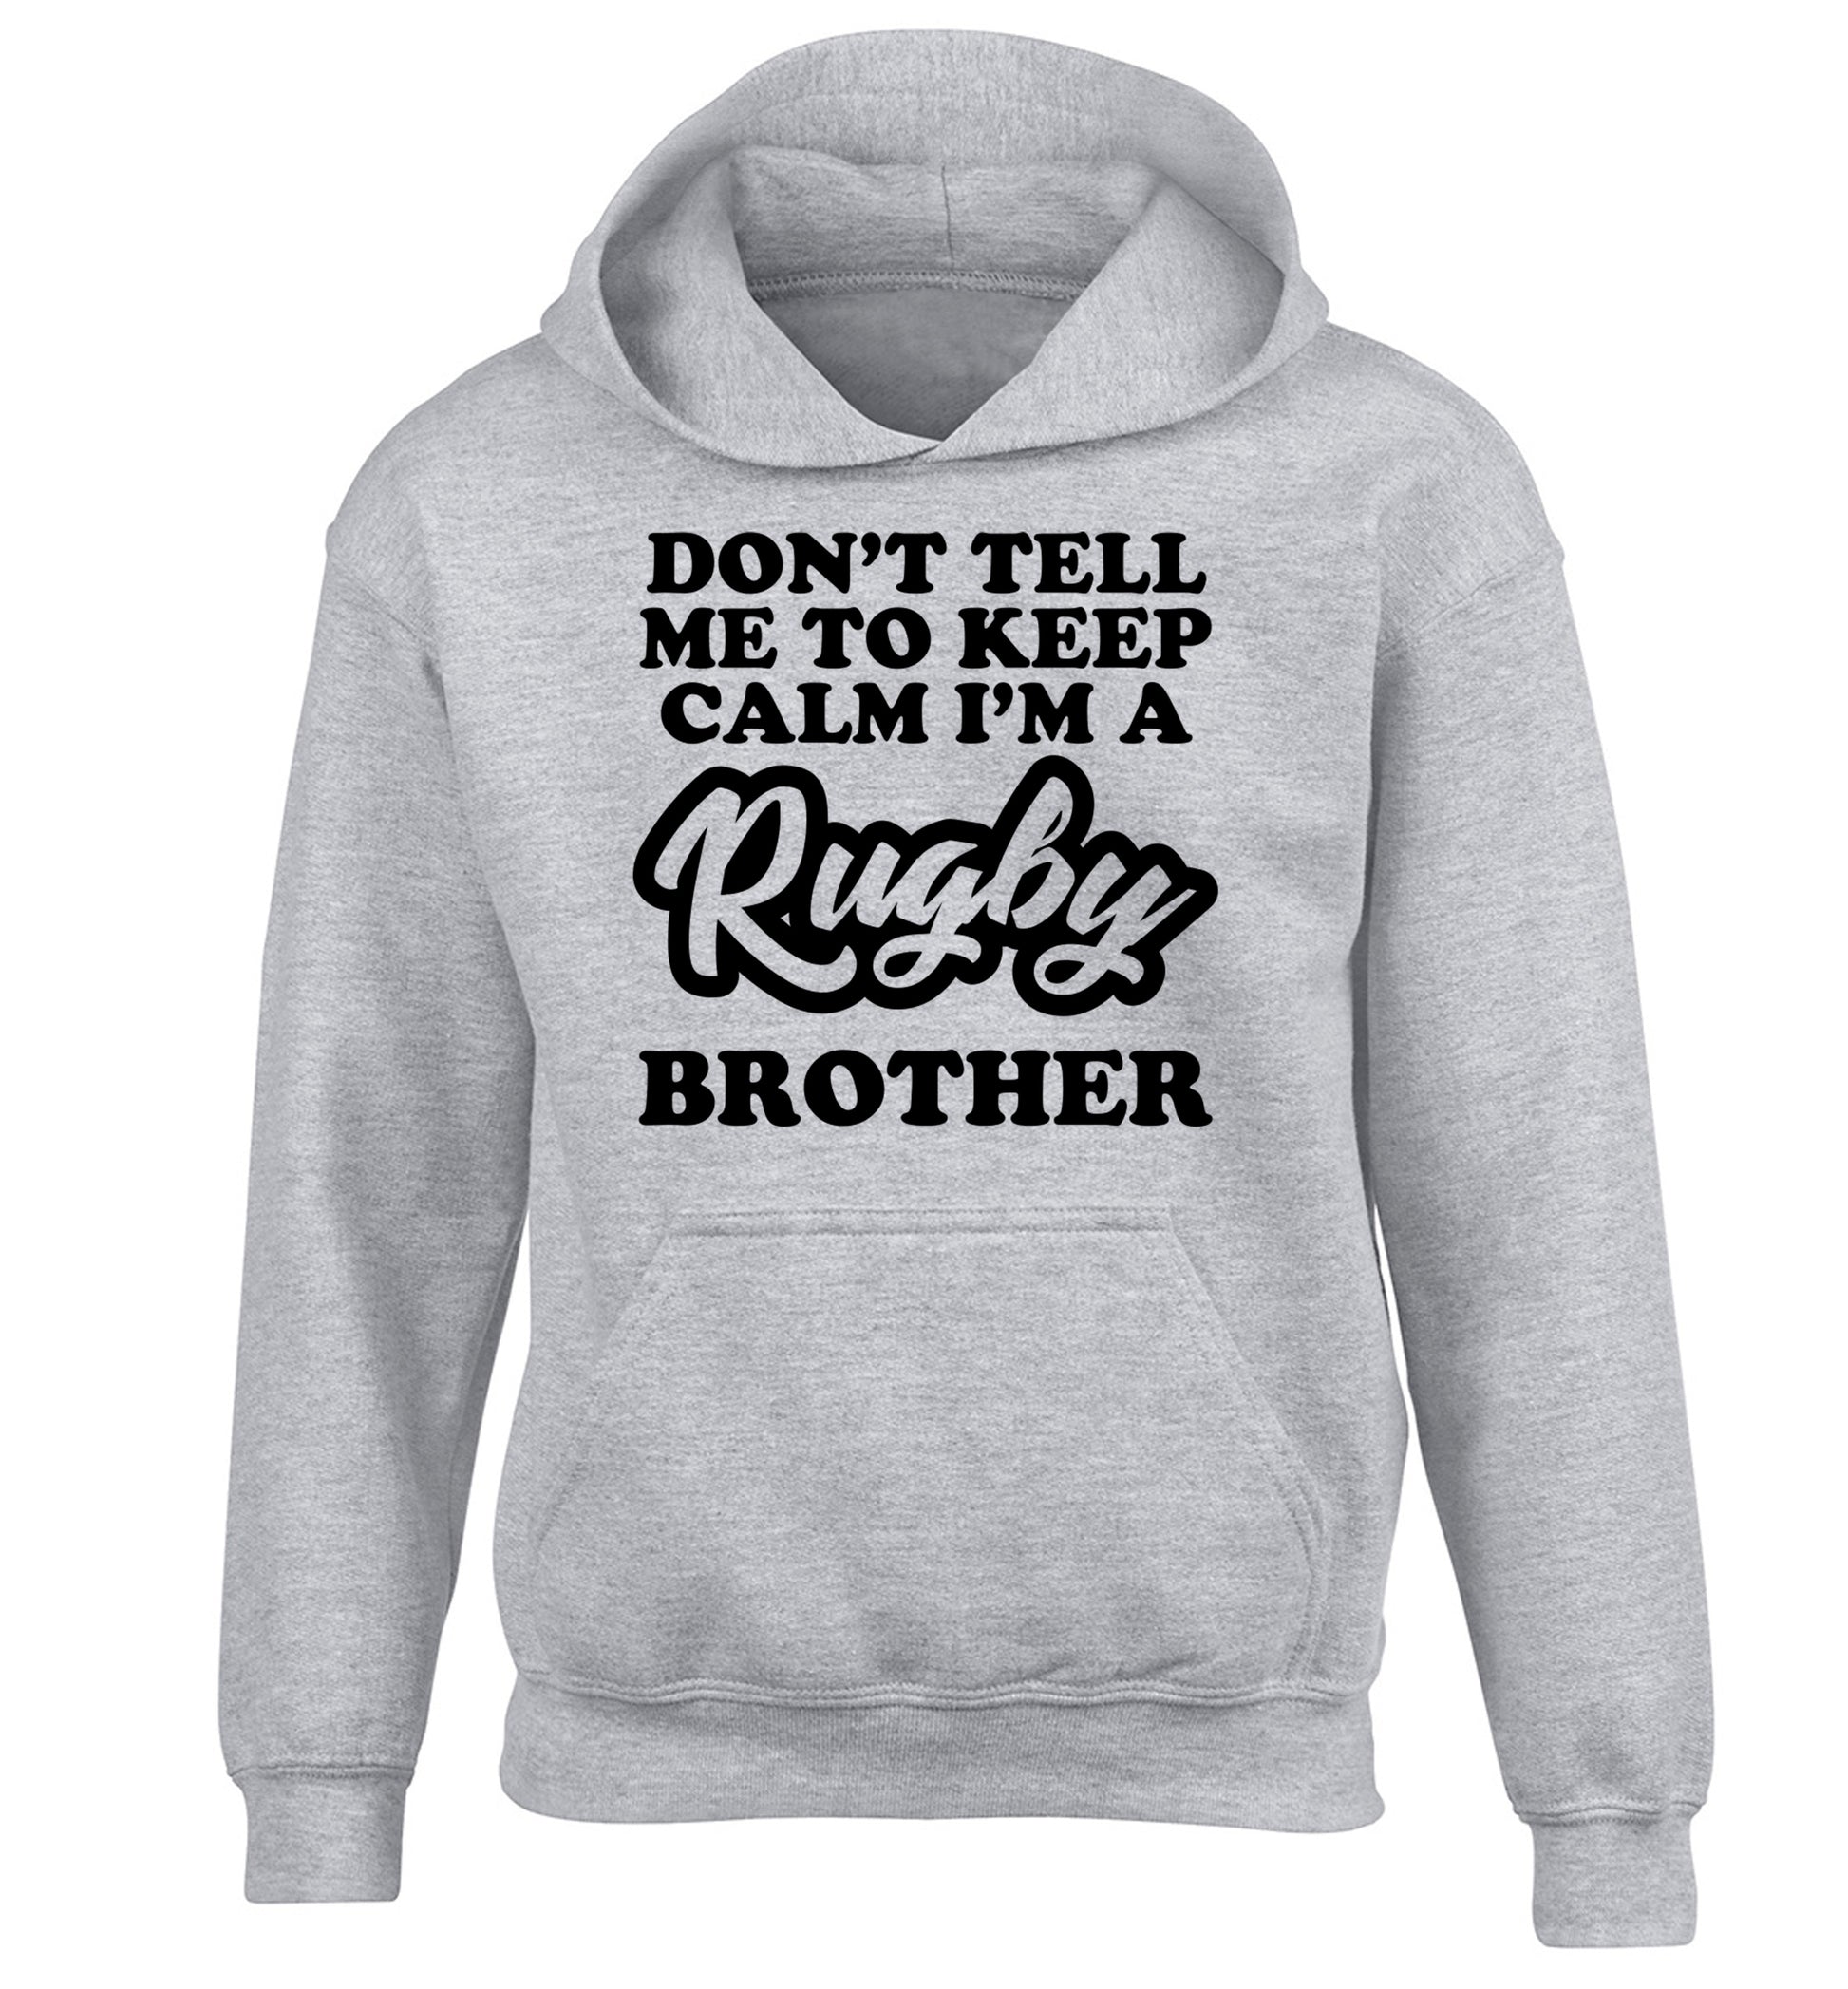 Don't tell me keep calm I'm a rugby brother children's grey hoodie 12-13 Years